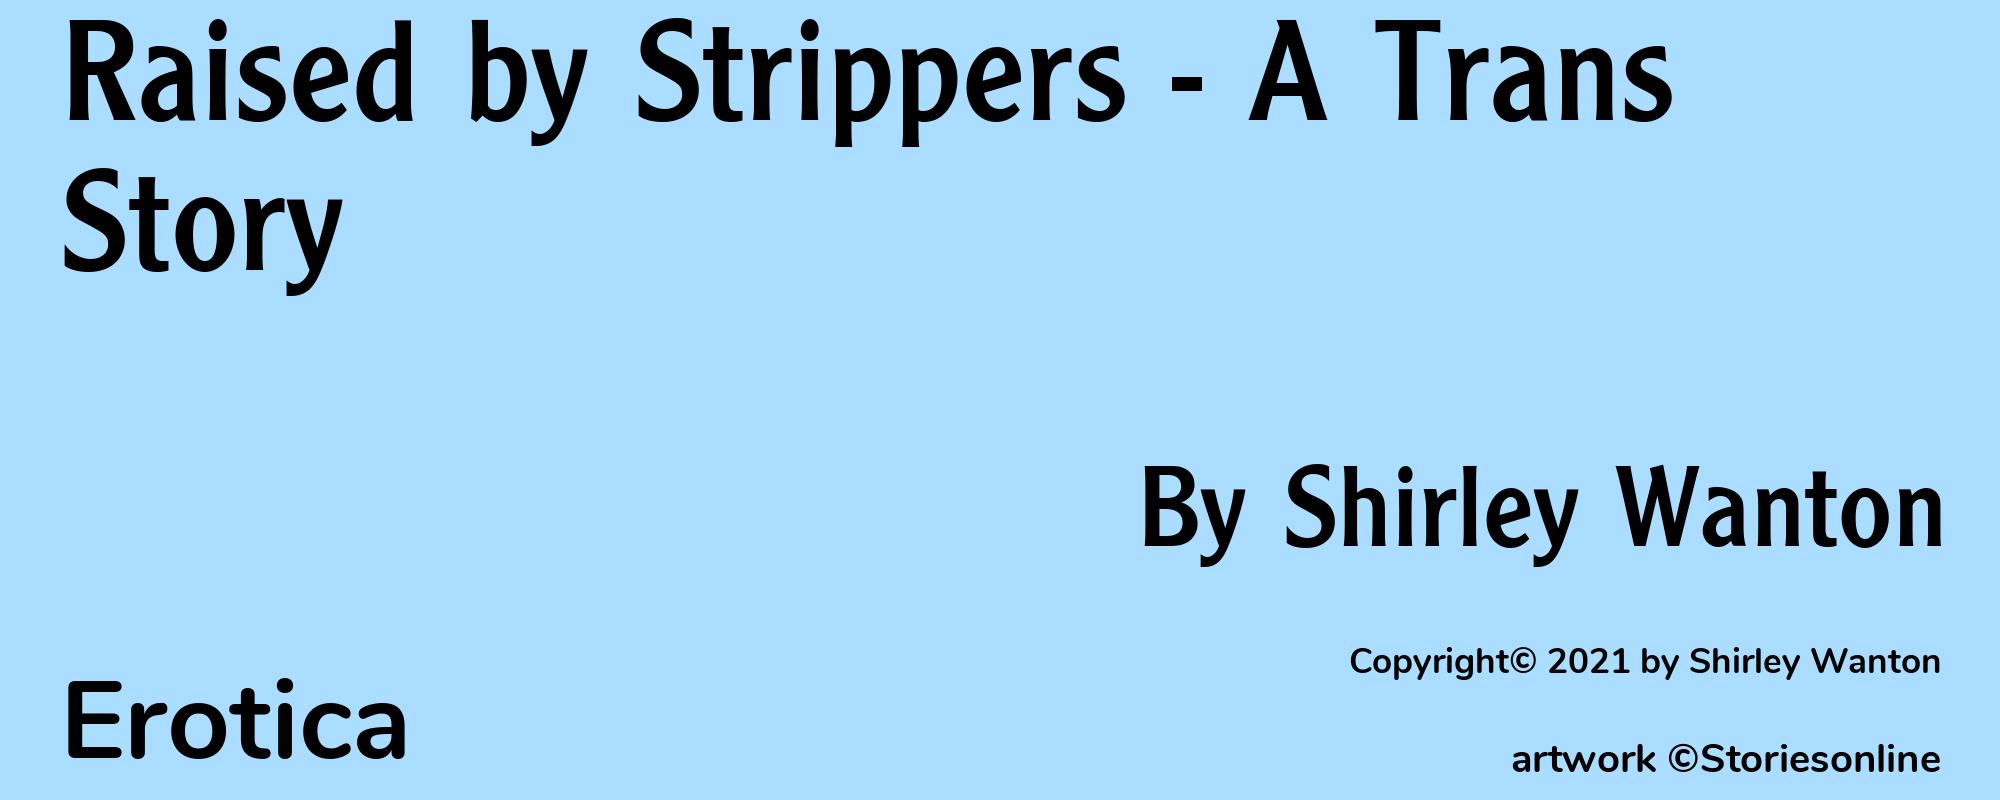 Raised by Strippers - A Trans Story - Cover